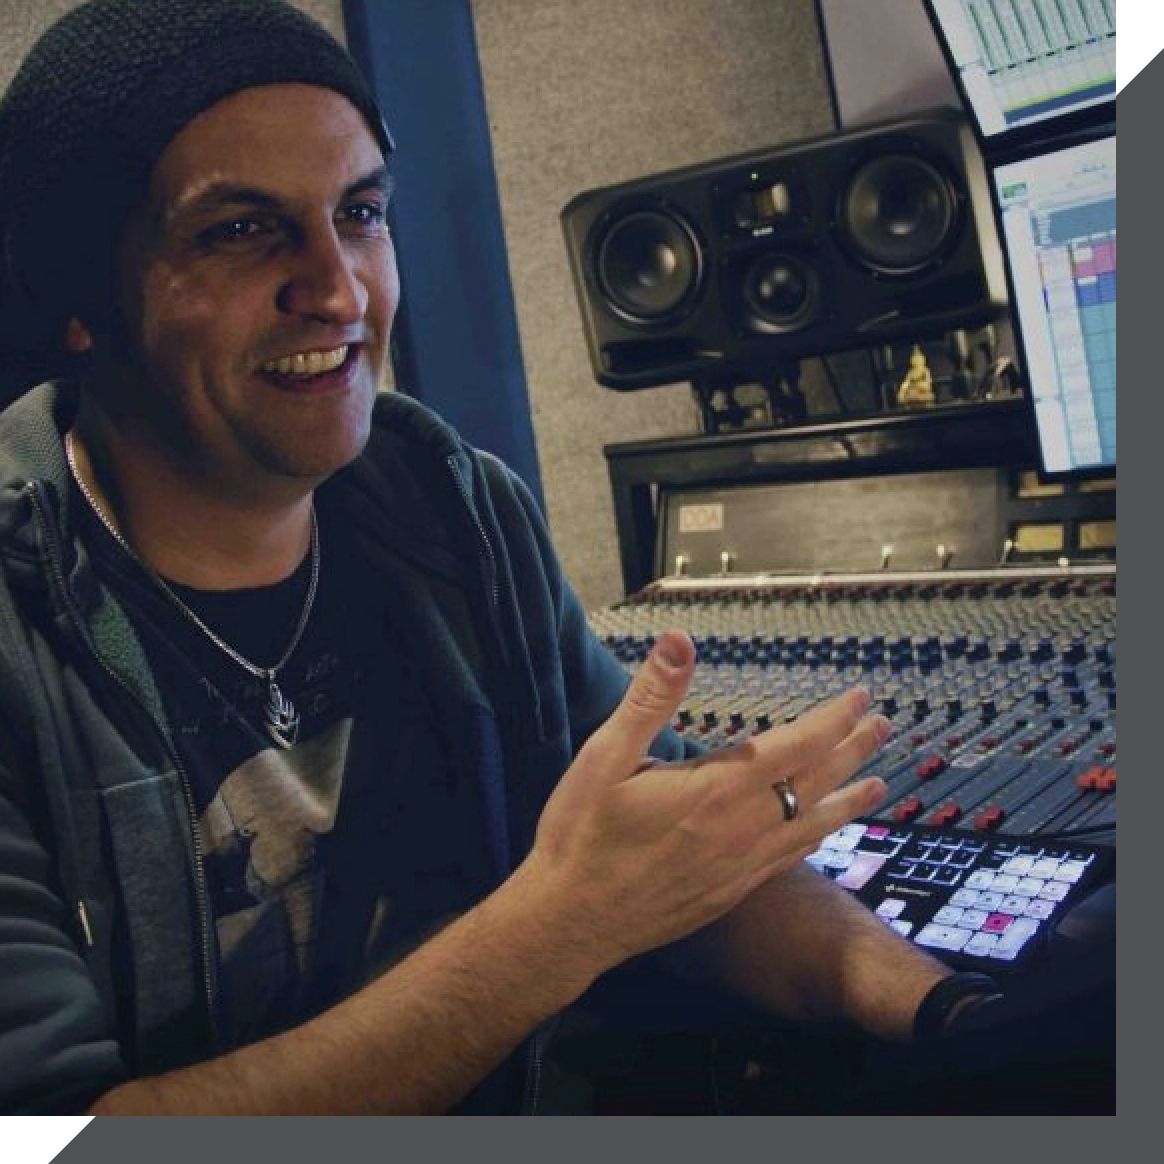 A person wearing a beanie and a dark jacket is sitting in a recording studio, gesturing with one hand while the other rests on a control panel with illuminated buttons. Large speakers and a monitor displaying audio levels are visible in the background.